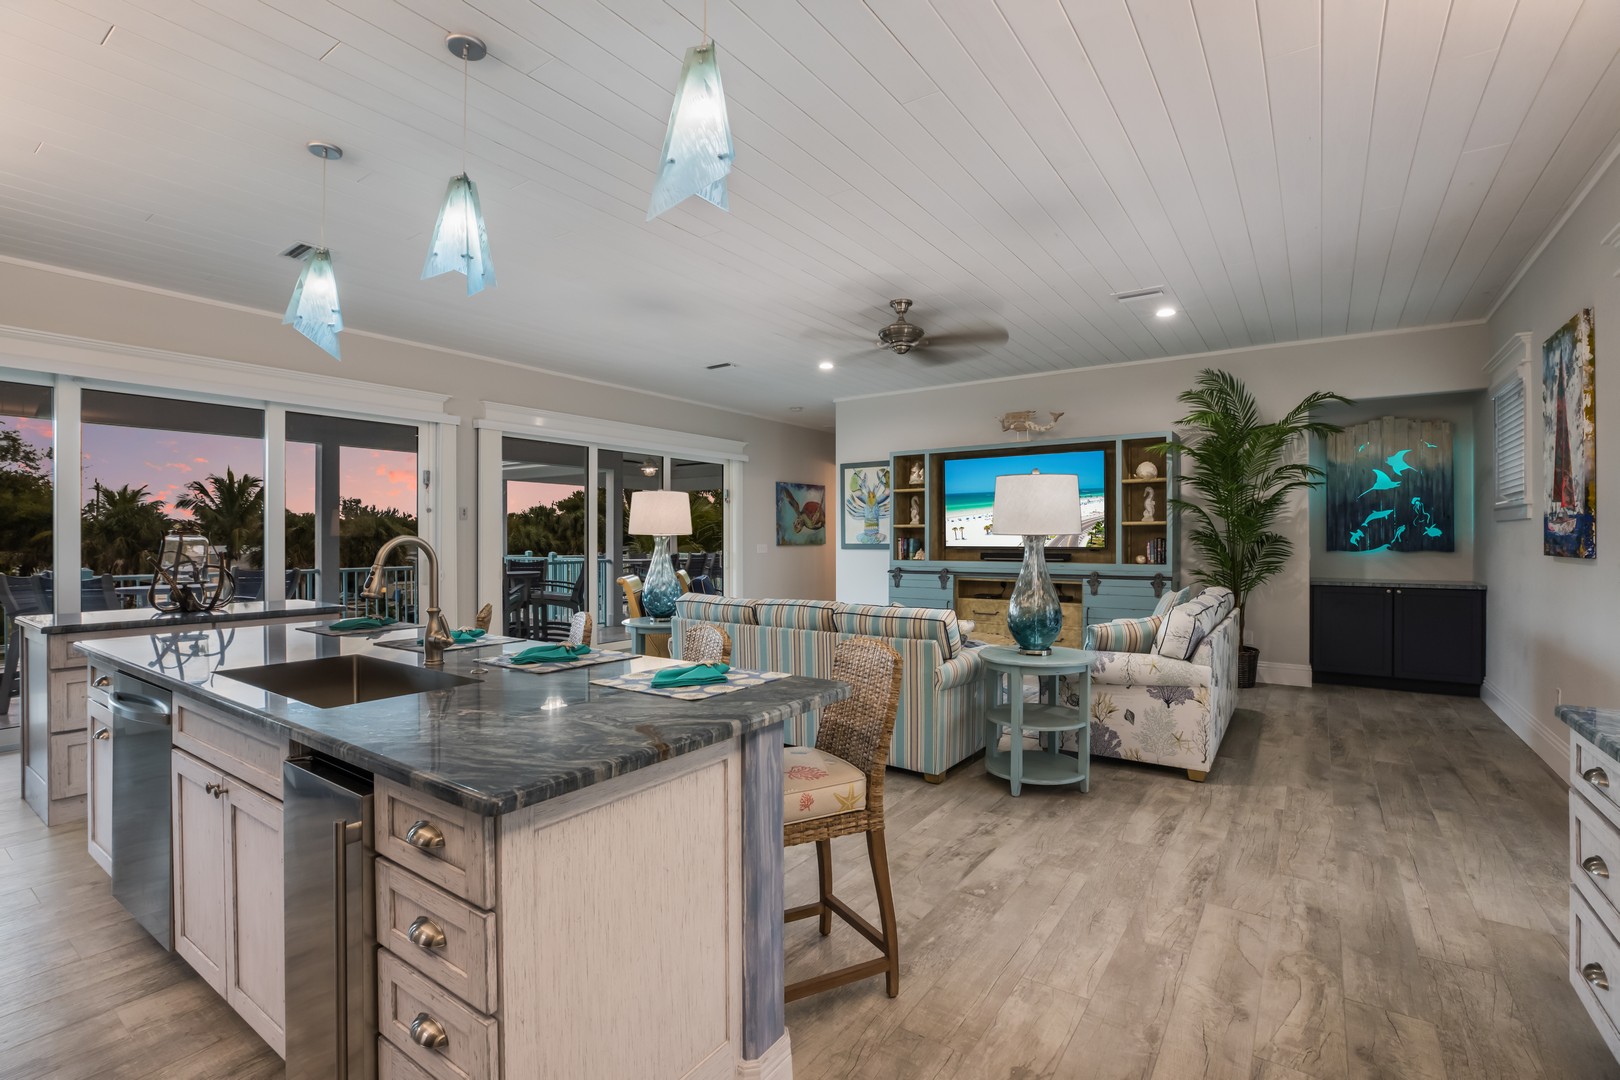 Snook Lookout - kitchen bar / living room area